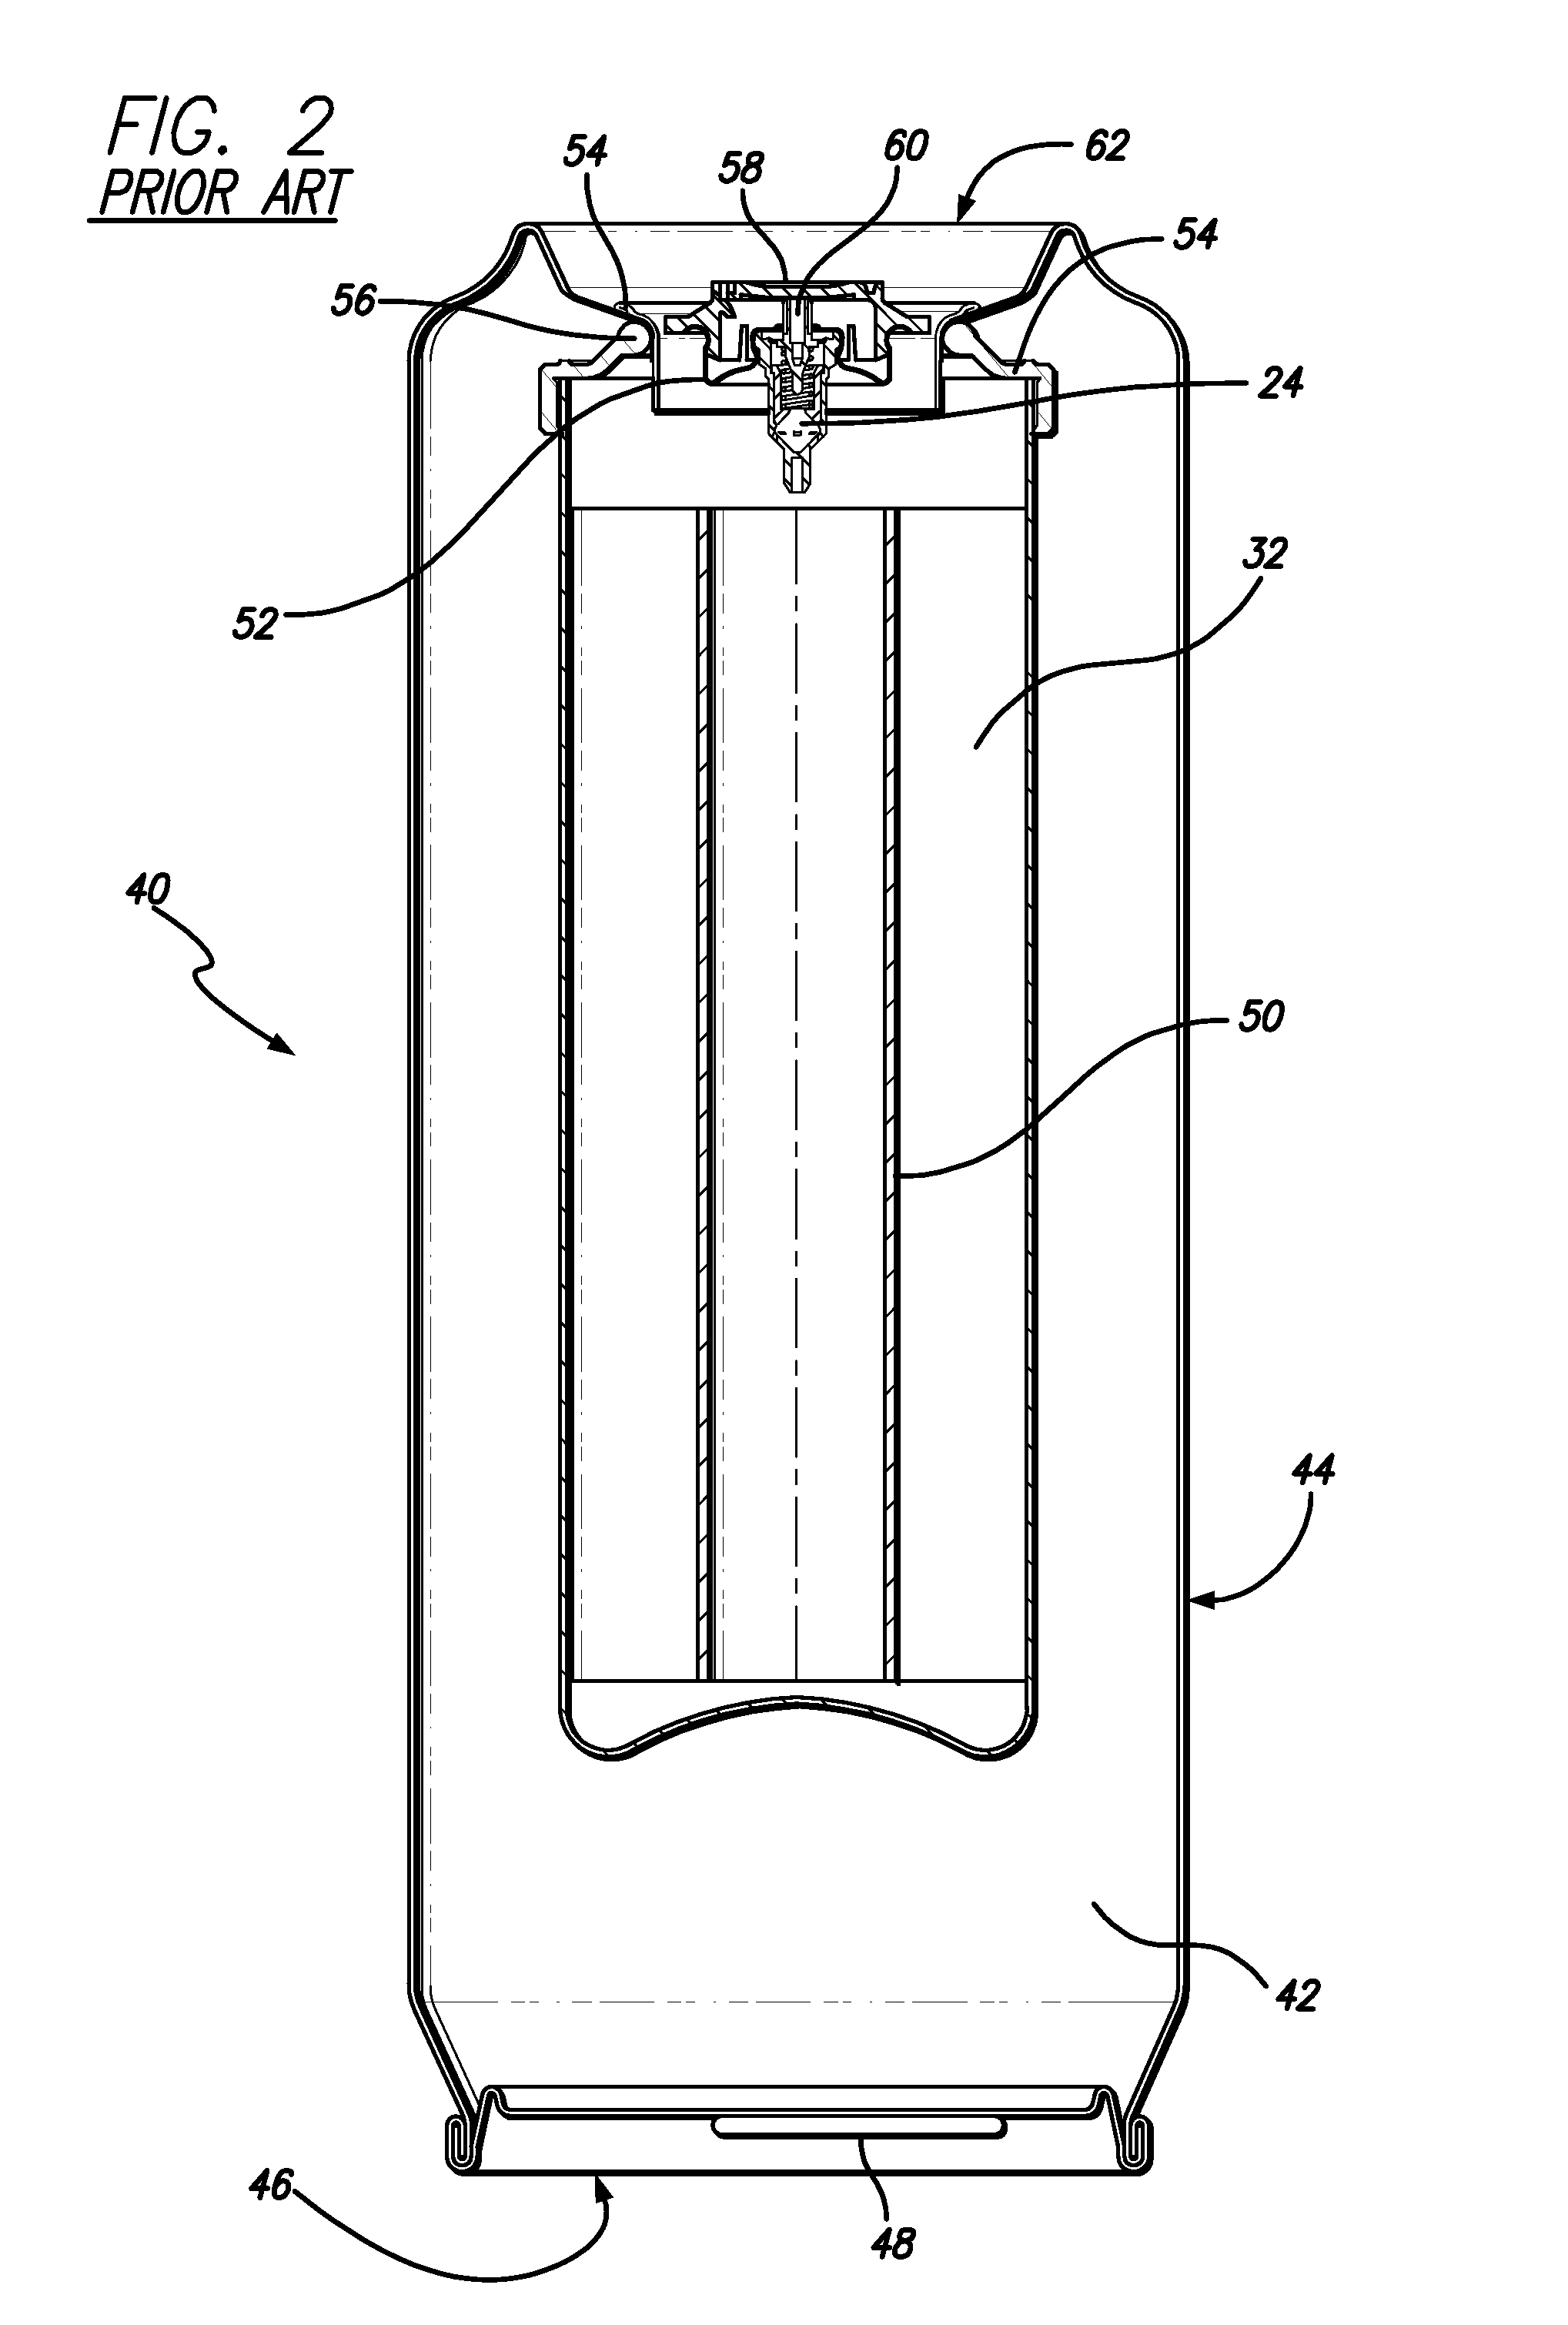 Heat exchange unit for self-cooling containers